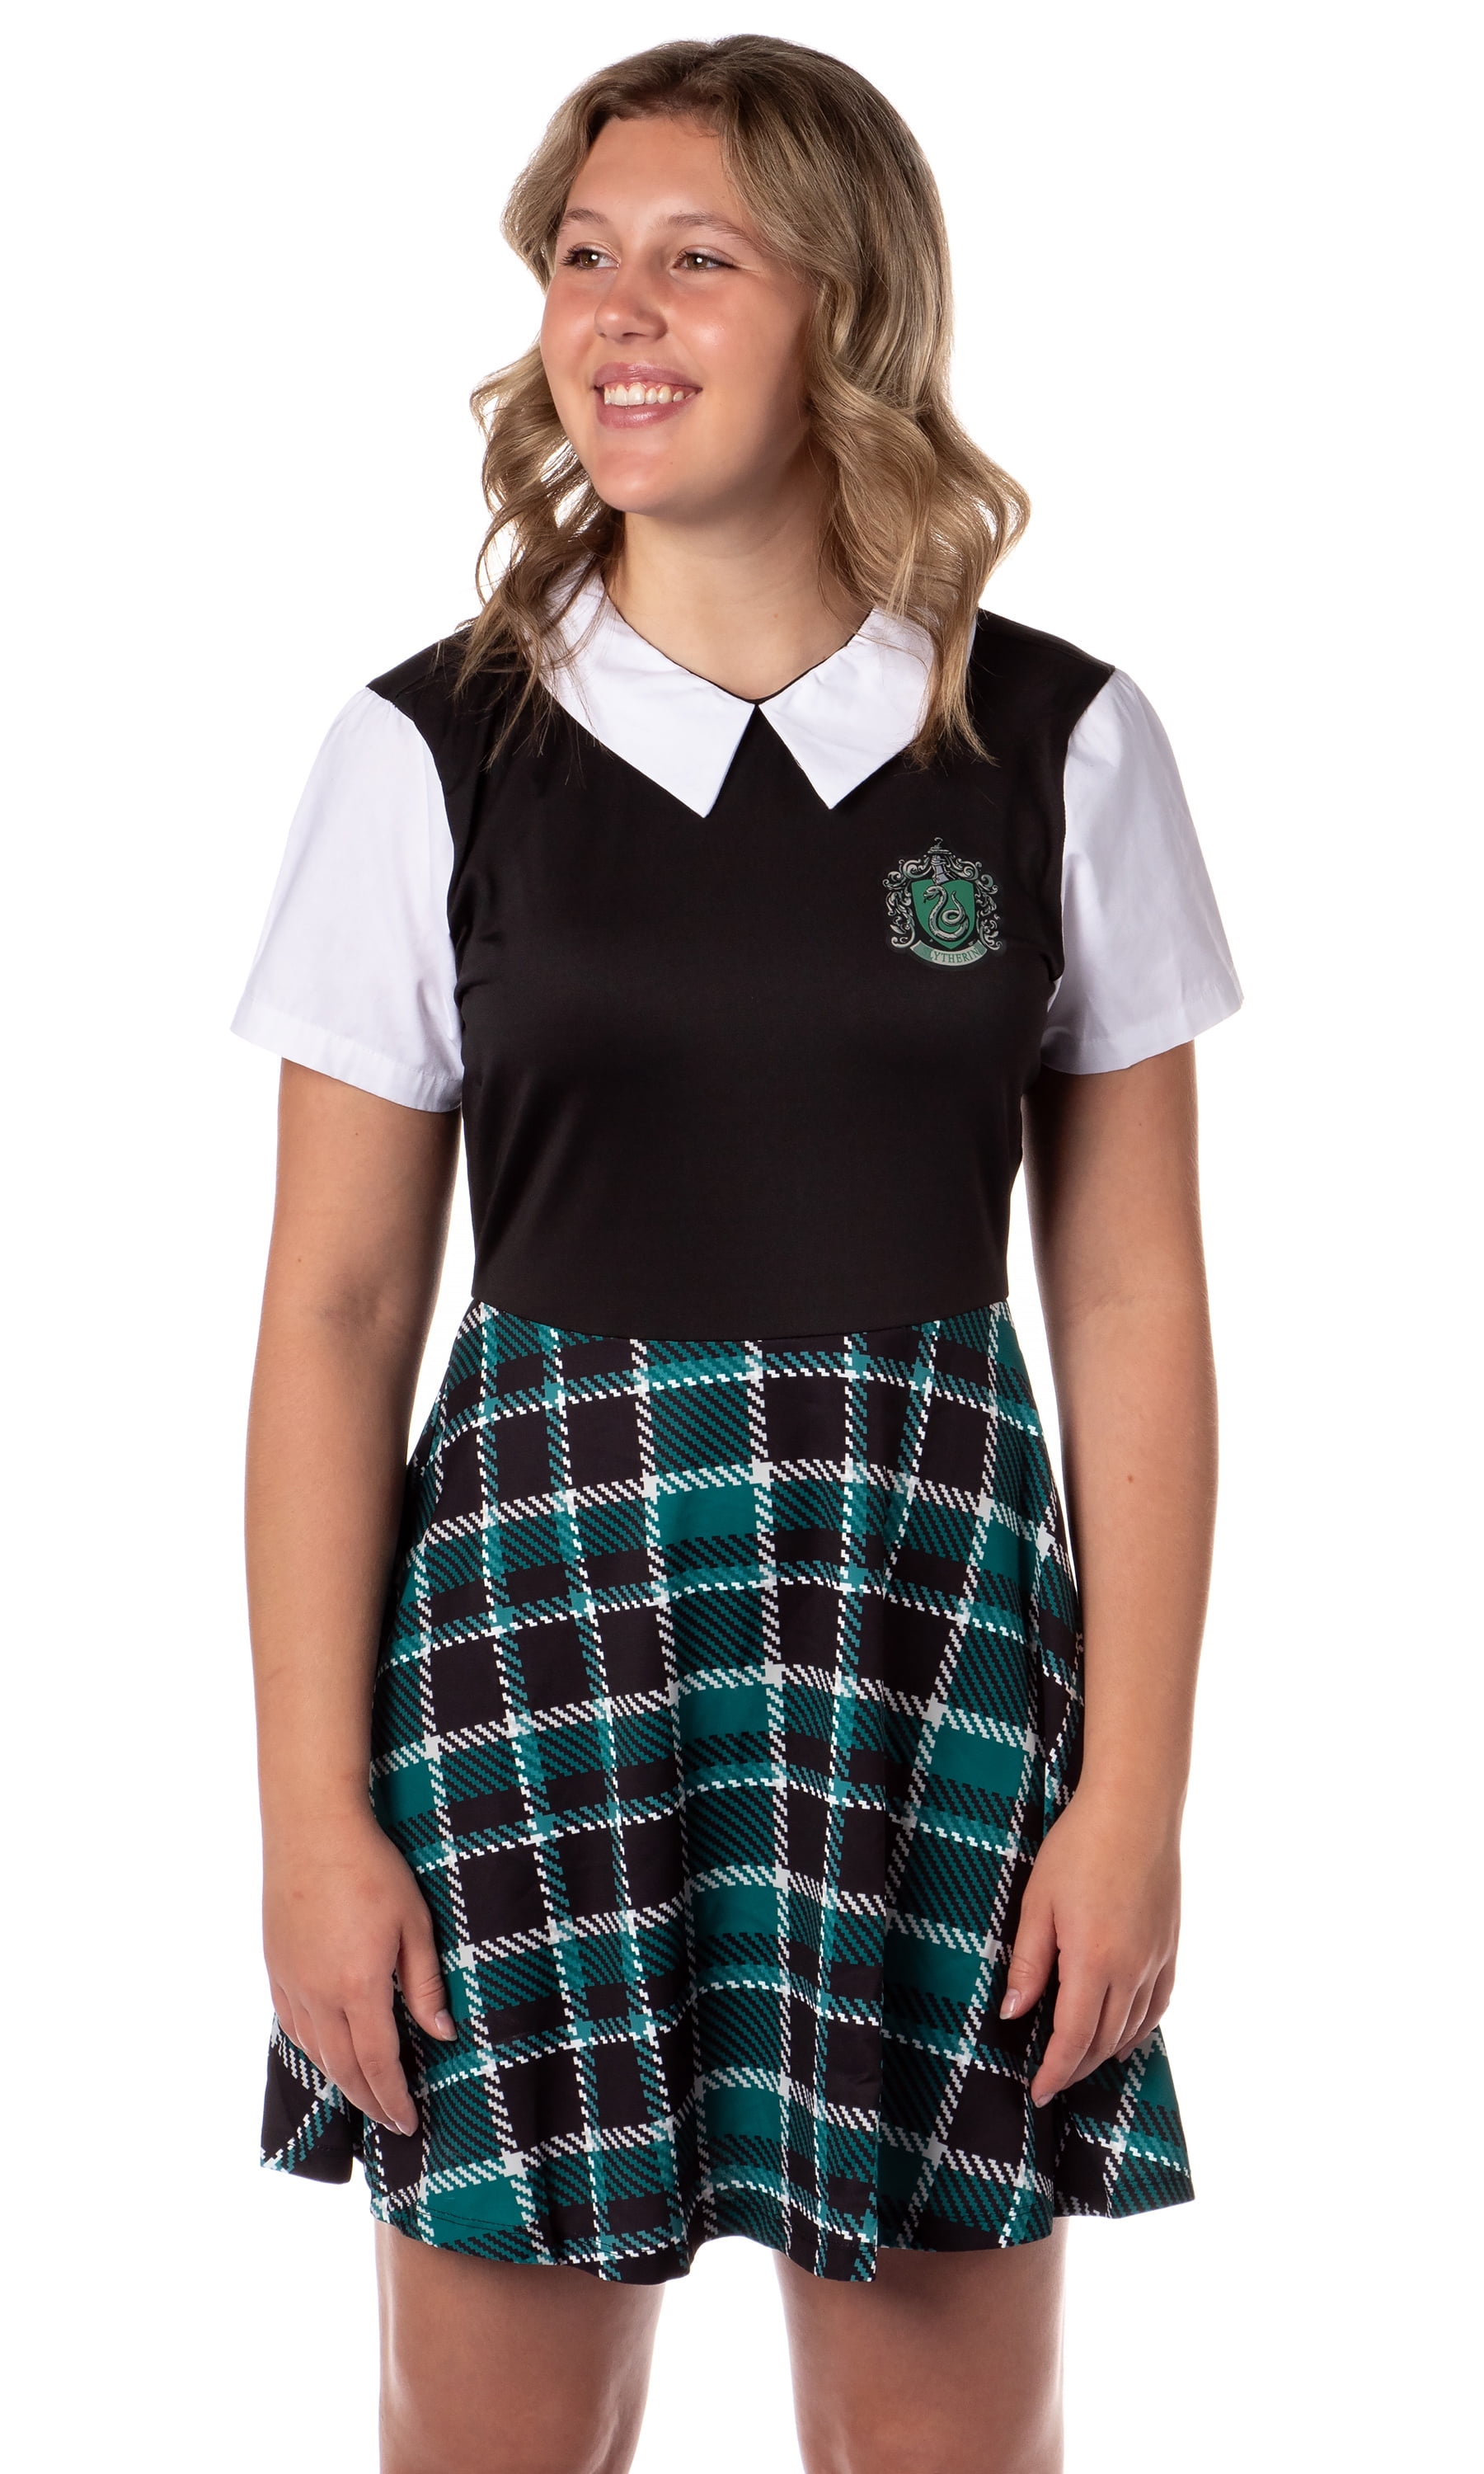 Harry Potter Slytherin Costume Dress Cosplay Plaid Skirt For Women Juniors  (MD)